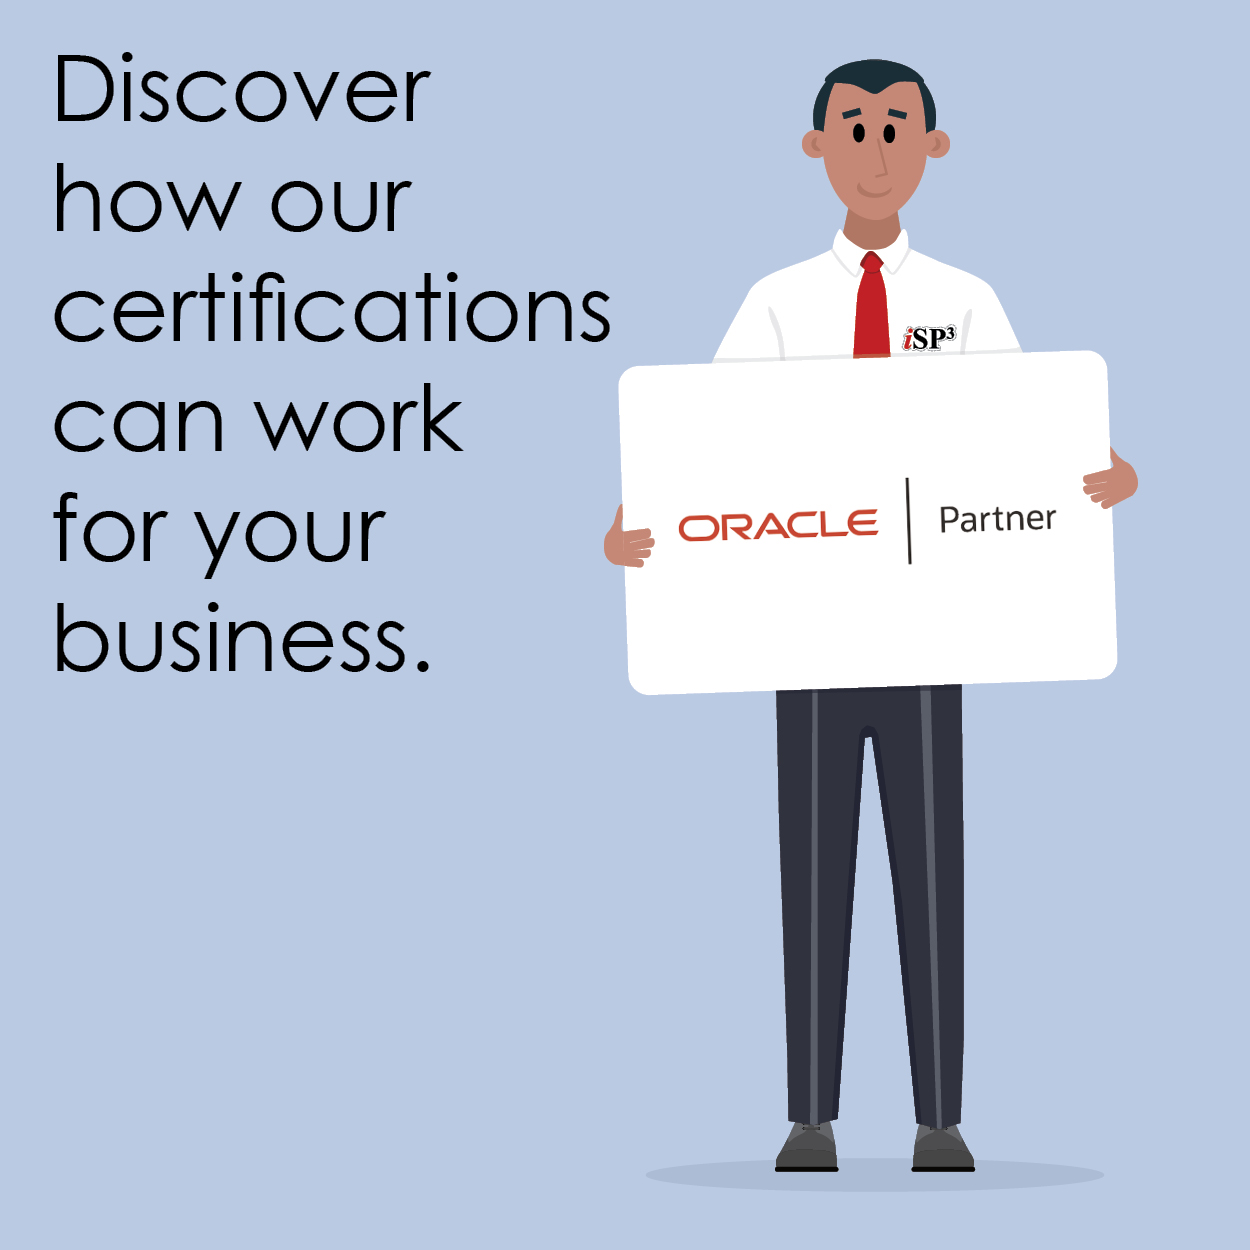 iSP3 is a Certified Oracle Partner, JD Edwards, OCI, Oracle Cloud Fusion